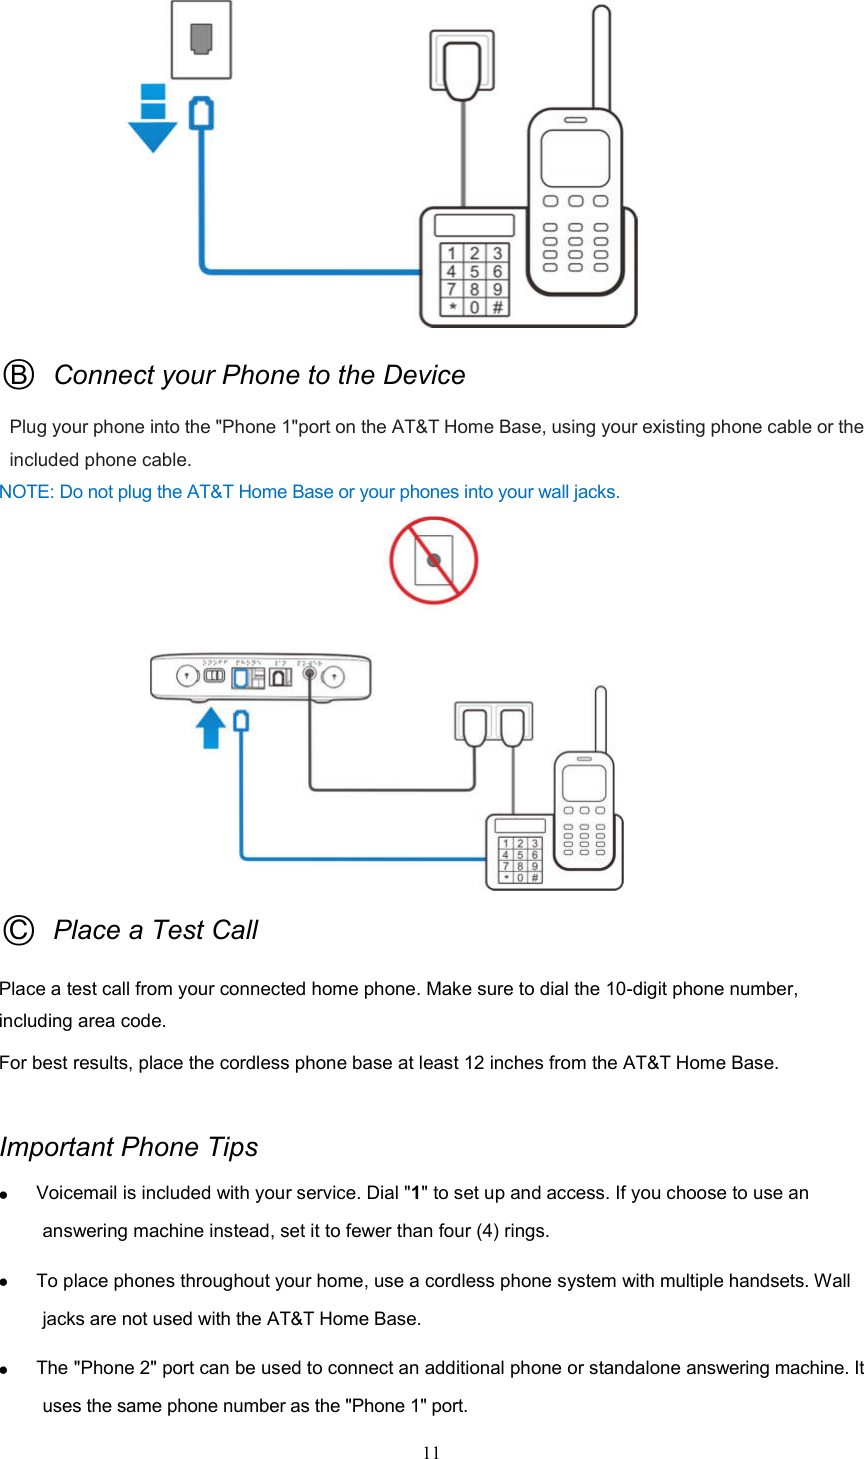 11                  ○B  Connect your Phone to the Device Plug your phone into the &quot;Phone 1&quot;port on the AT&amp;T Home Base, using your existing phone cable or the included phone cable.     NOTE: Do not plug the AT&amp;T Home Base or your phones into your wall jacks.                    ○C  Place a Test Call Place a test call from your connected home phone. Make sure to dial the 10-digit phone number, including area code. For best results, place the cordless phone base at least 12 inches from the AT&amp;T Home Base.  Important Phone Tips  Voicemail is included with your service. Dial &quot;1&quot; to set up and access. If you choose to use an answering machine instead, set it to fewer than four (4) rings.    To place phones throughout your home, use a cordless phone system with multiple handsets. Wall jacks are not used with the AT&amp;T Home Base.  The &quot;Phone 2&quot; port can be used to connect an additional phone or standalone answering machine. It uses the same phone number as the &quot;Phone 1&quot; port. 